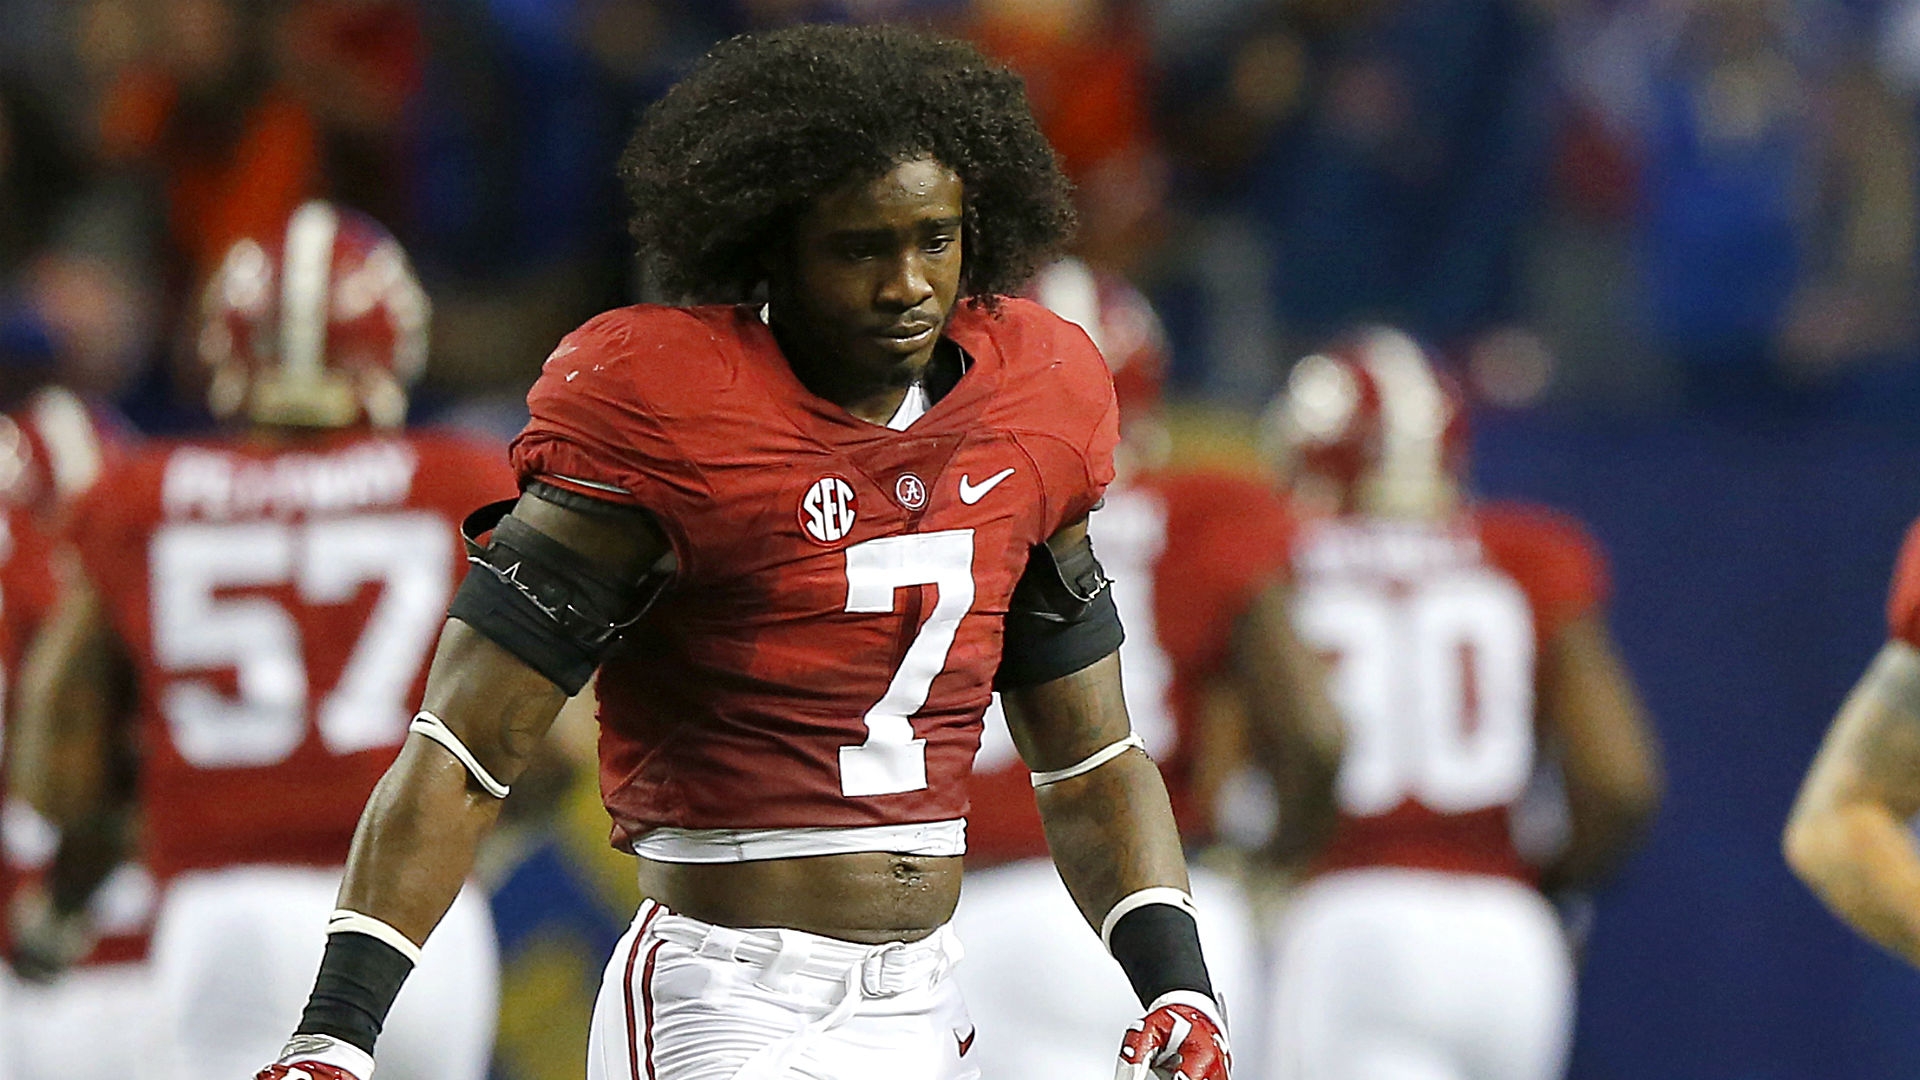 Alabama sends home Tony Brown from Cotton Bowl for violating team rules